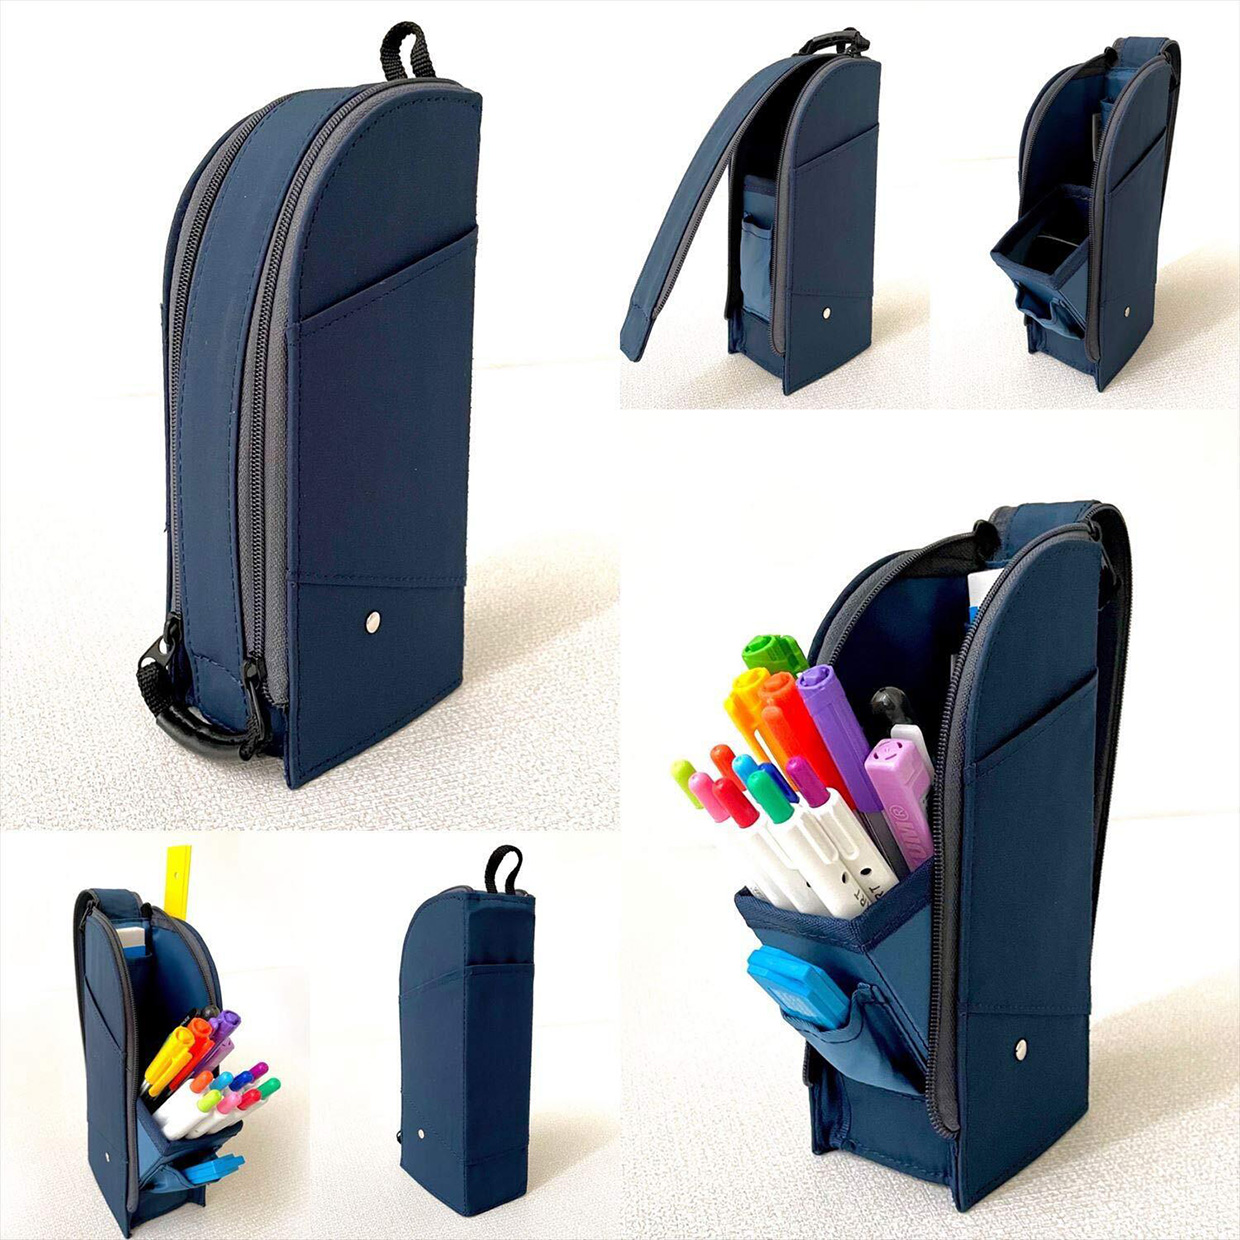 The Raymay Fujii Standing Pen Case Goes from Backpack to Desktop